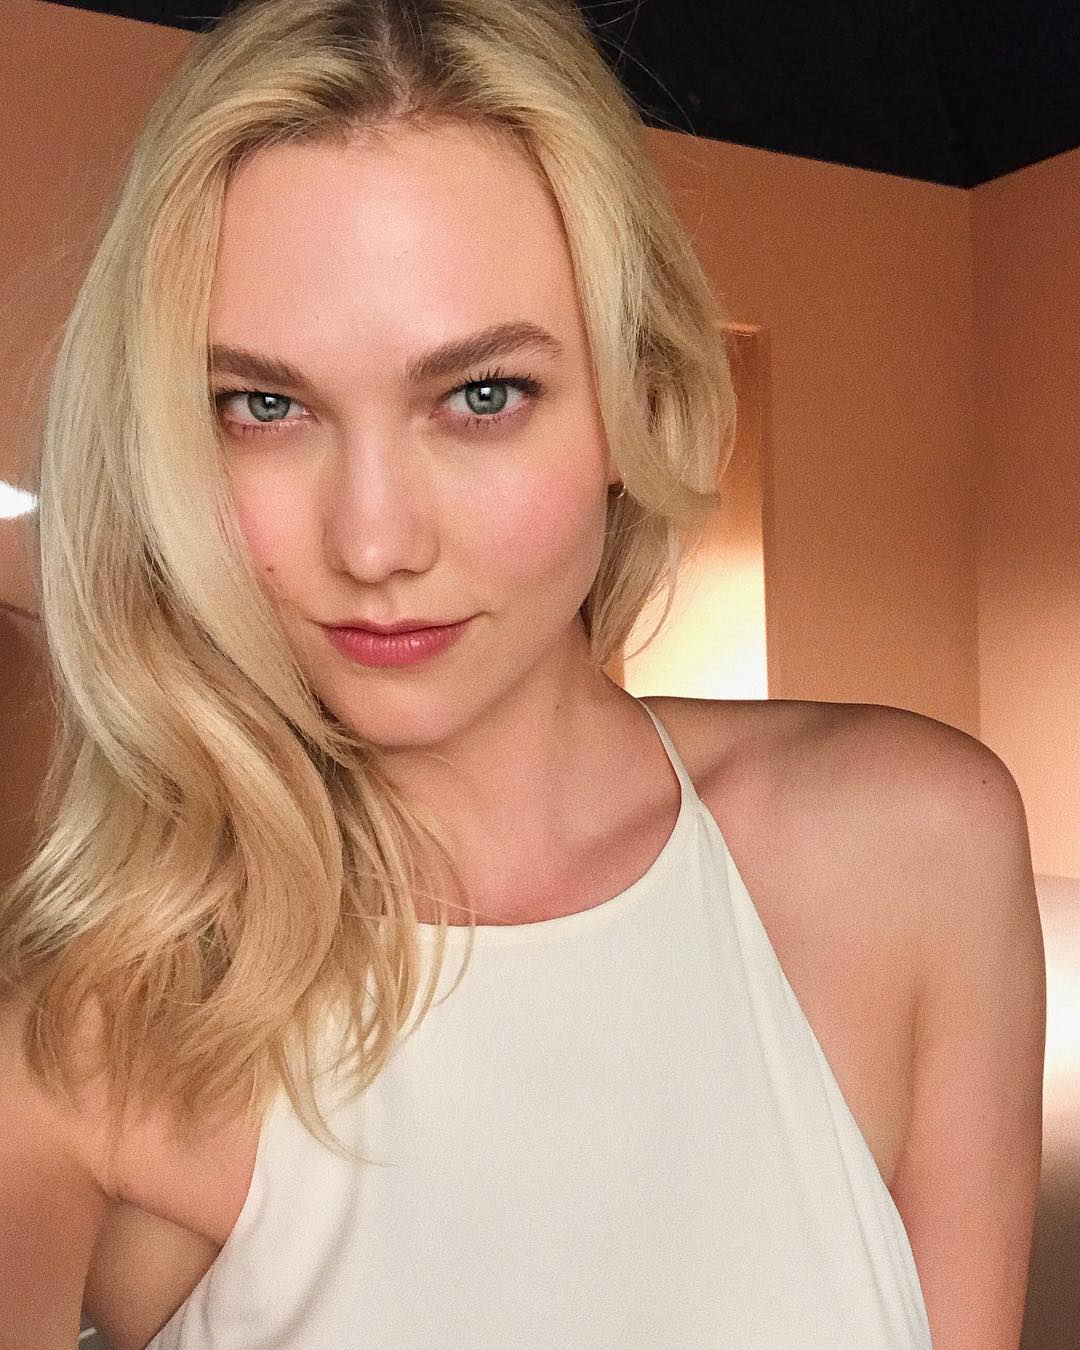 75+ Hot And Sexy Pictures Of Karlie Kloss Will Prove Why She Is America’s Sweetheart | Best Of Comic Books